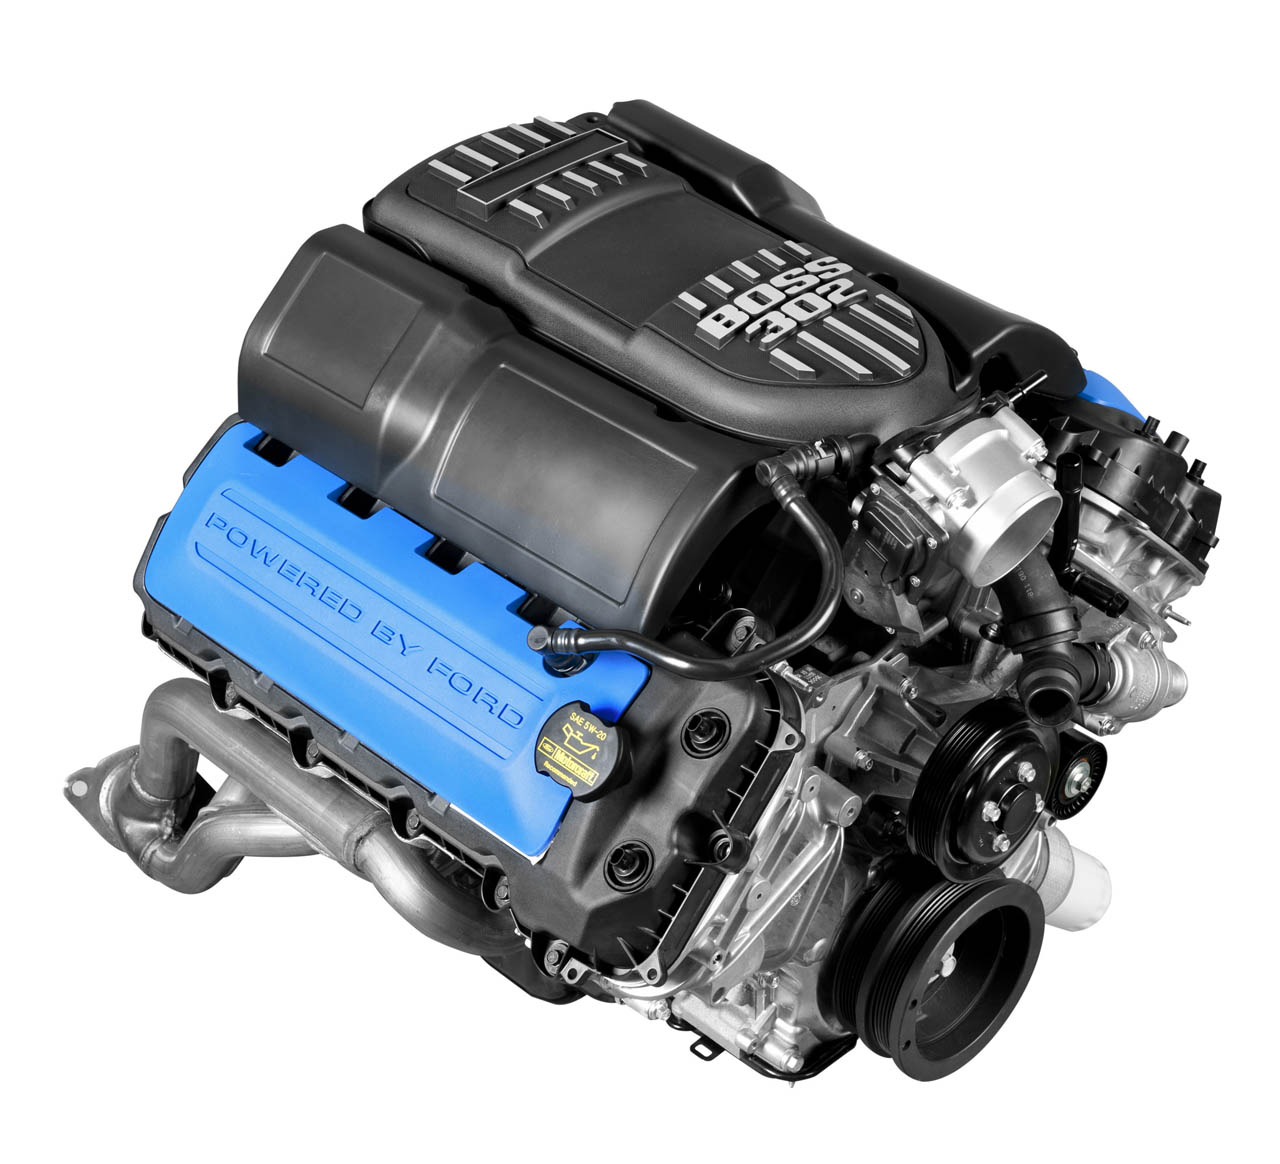 youngmanblog: Wards 2012 10 best engines